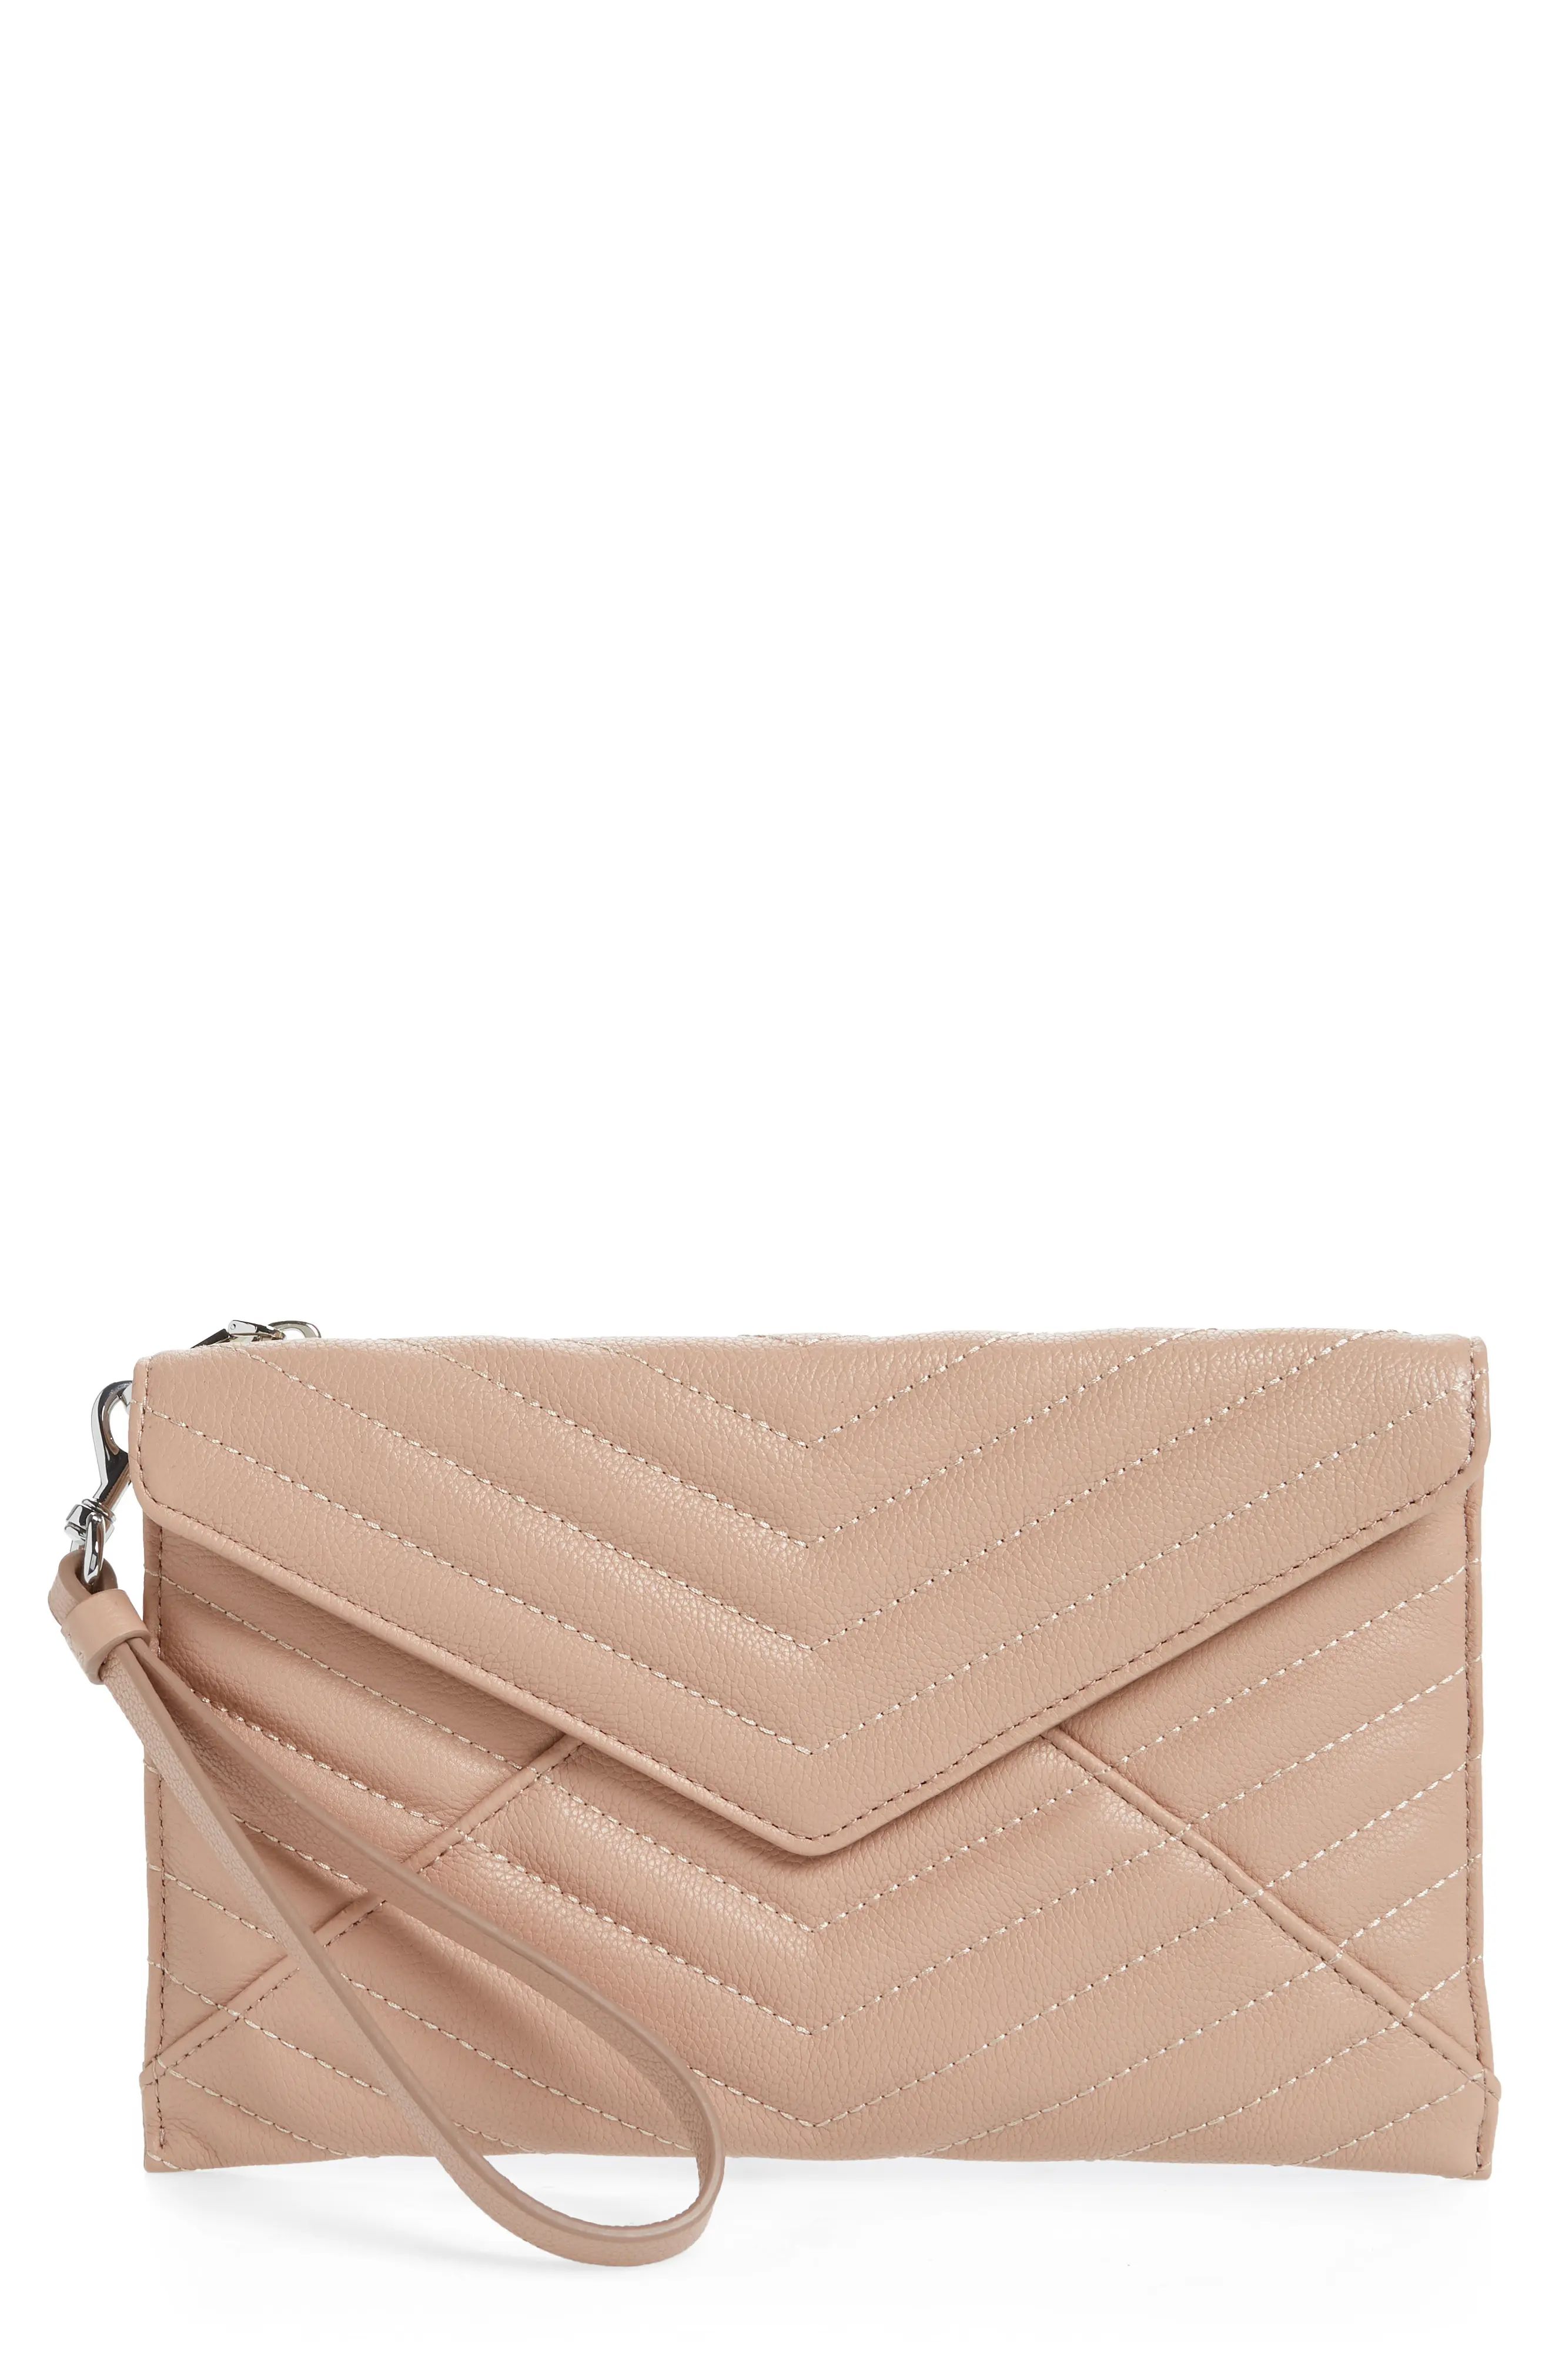 Rebecca Minkoff Leo Quilted Leather Clutch | Nordstrom